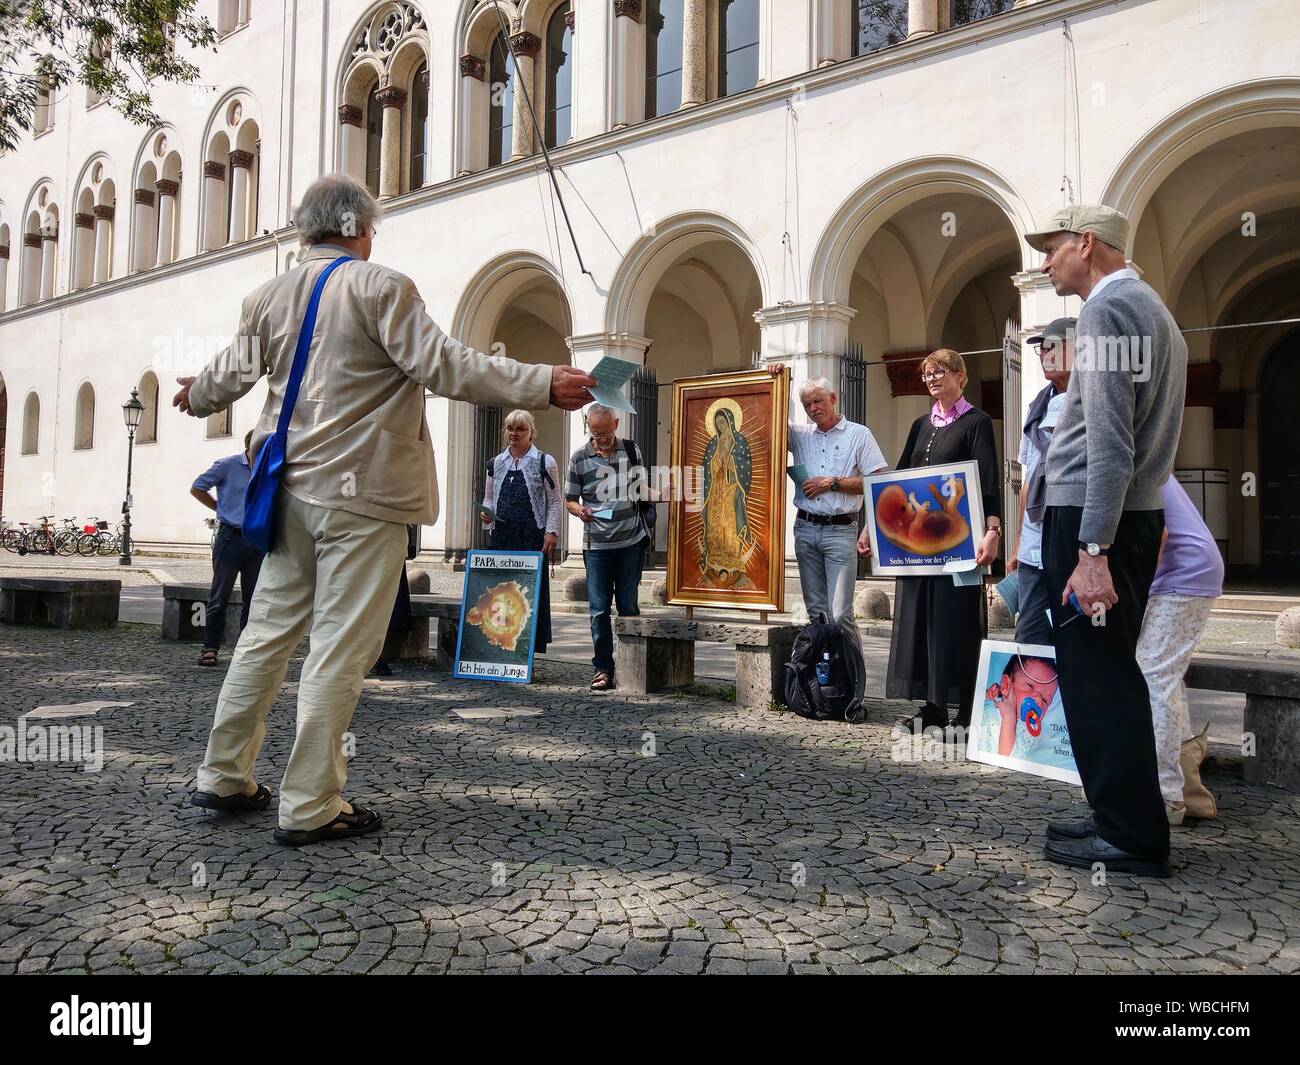 Munich, Bavaria, Germany. 26th Aug, 2019. Anti-abortion activist WOLFGANG HERRING leads a vigil with a painting of the Virgin Mary. Headed by well-known anti abortion activist Wolfgang Herring, a small group of Christian anti-abortion activists marched through the city of Munich, protesting against the Pro Familia organization who offers counseling services for pregnant women, ultimately ending at the Ludwig Maximilian University's Geschwister Scholl Platz. Credit: Sachelle Babbar/ZUMA Wire/Alamy Live News Stock Photo